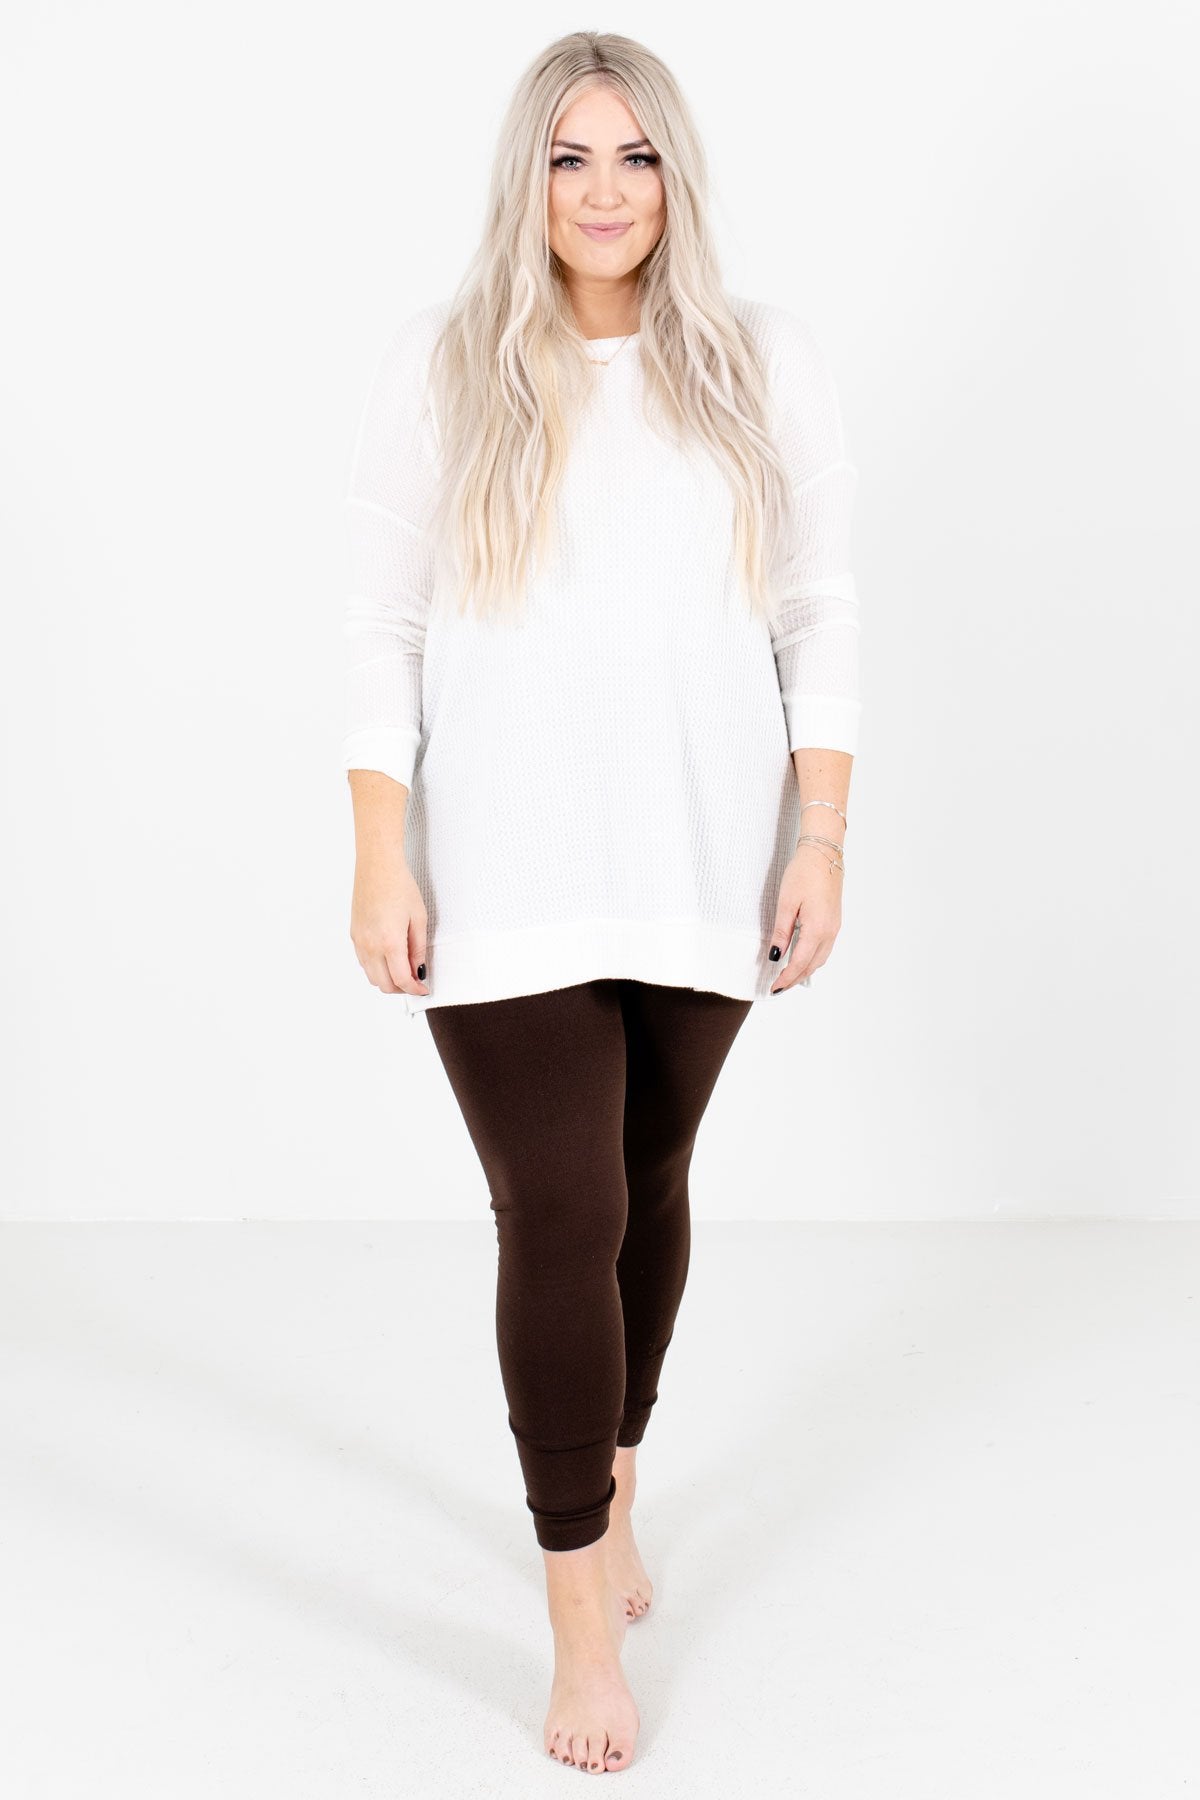 Brown Cute and Comfortable Boutique Leggings for Women